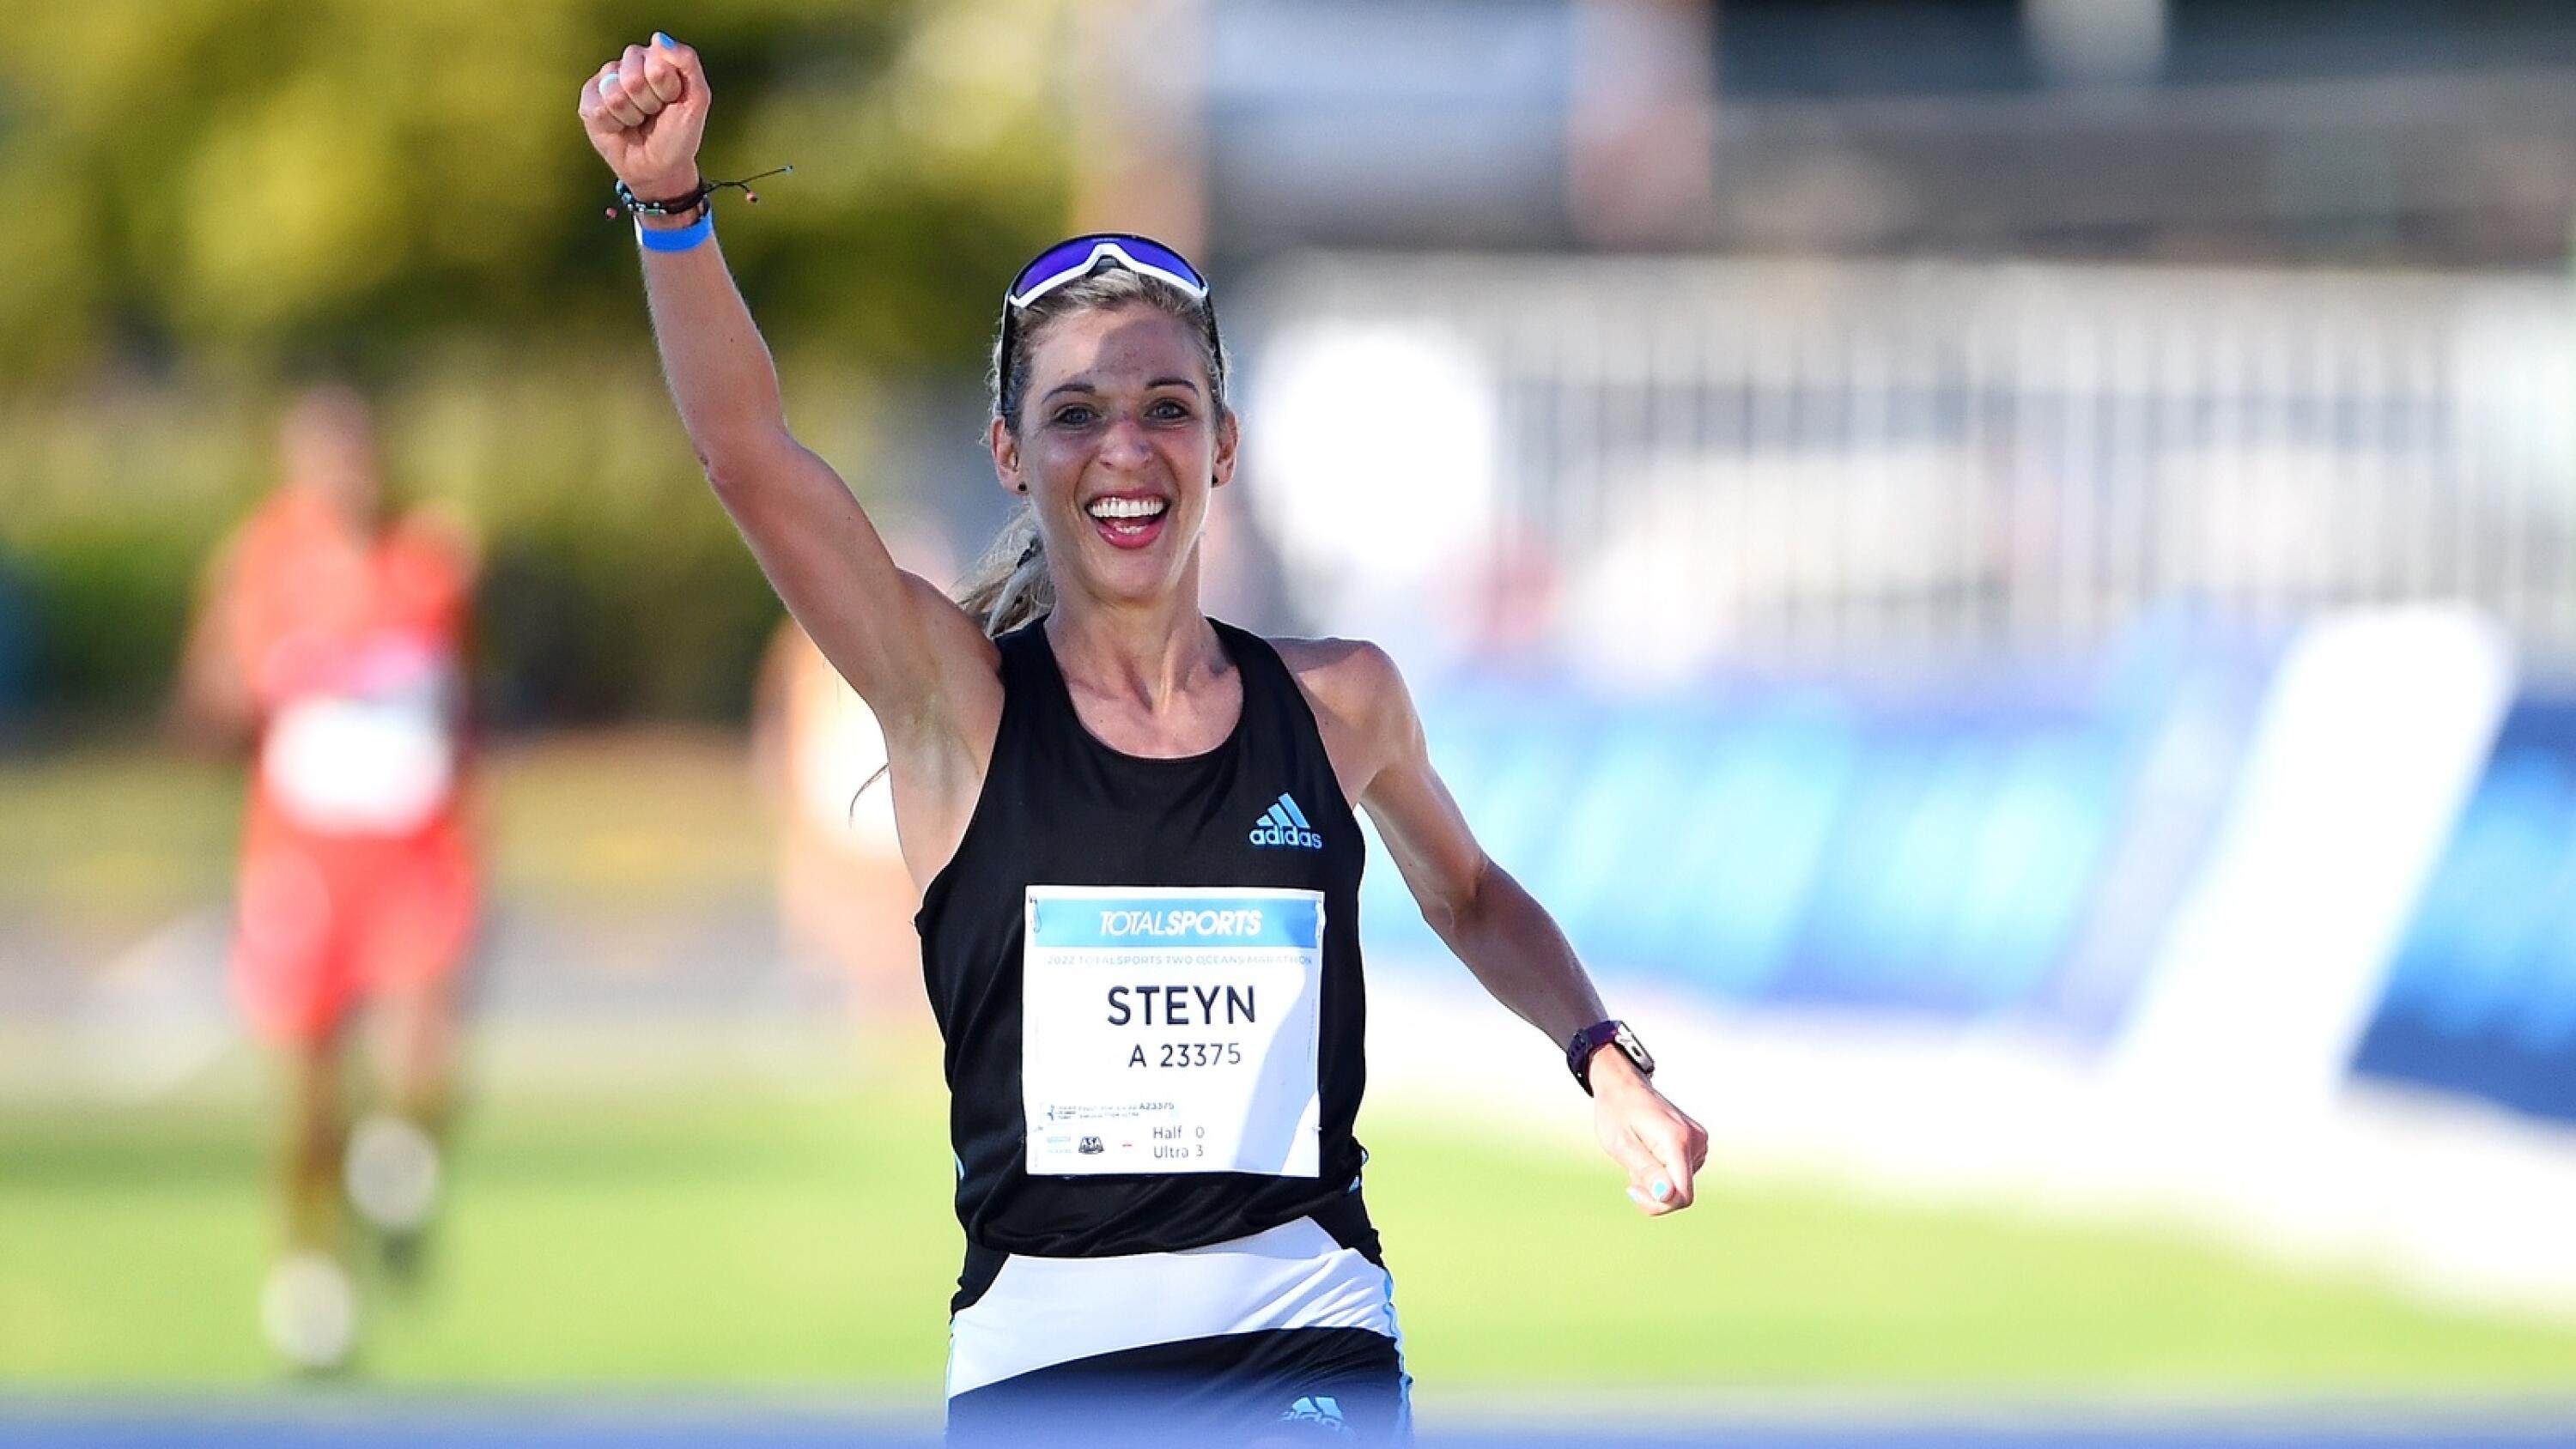 Gerda Steyn wins the Total Sport Two Oceans Marathon with tie 3:29: 42, breaking a 30 year old record